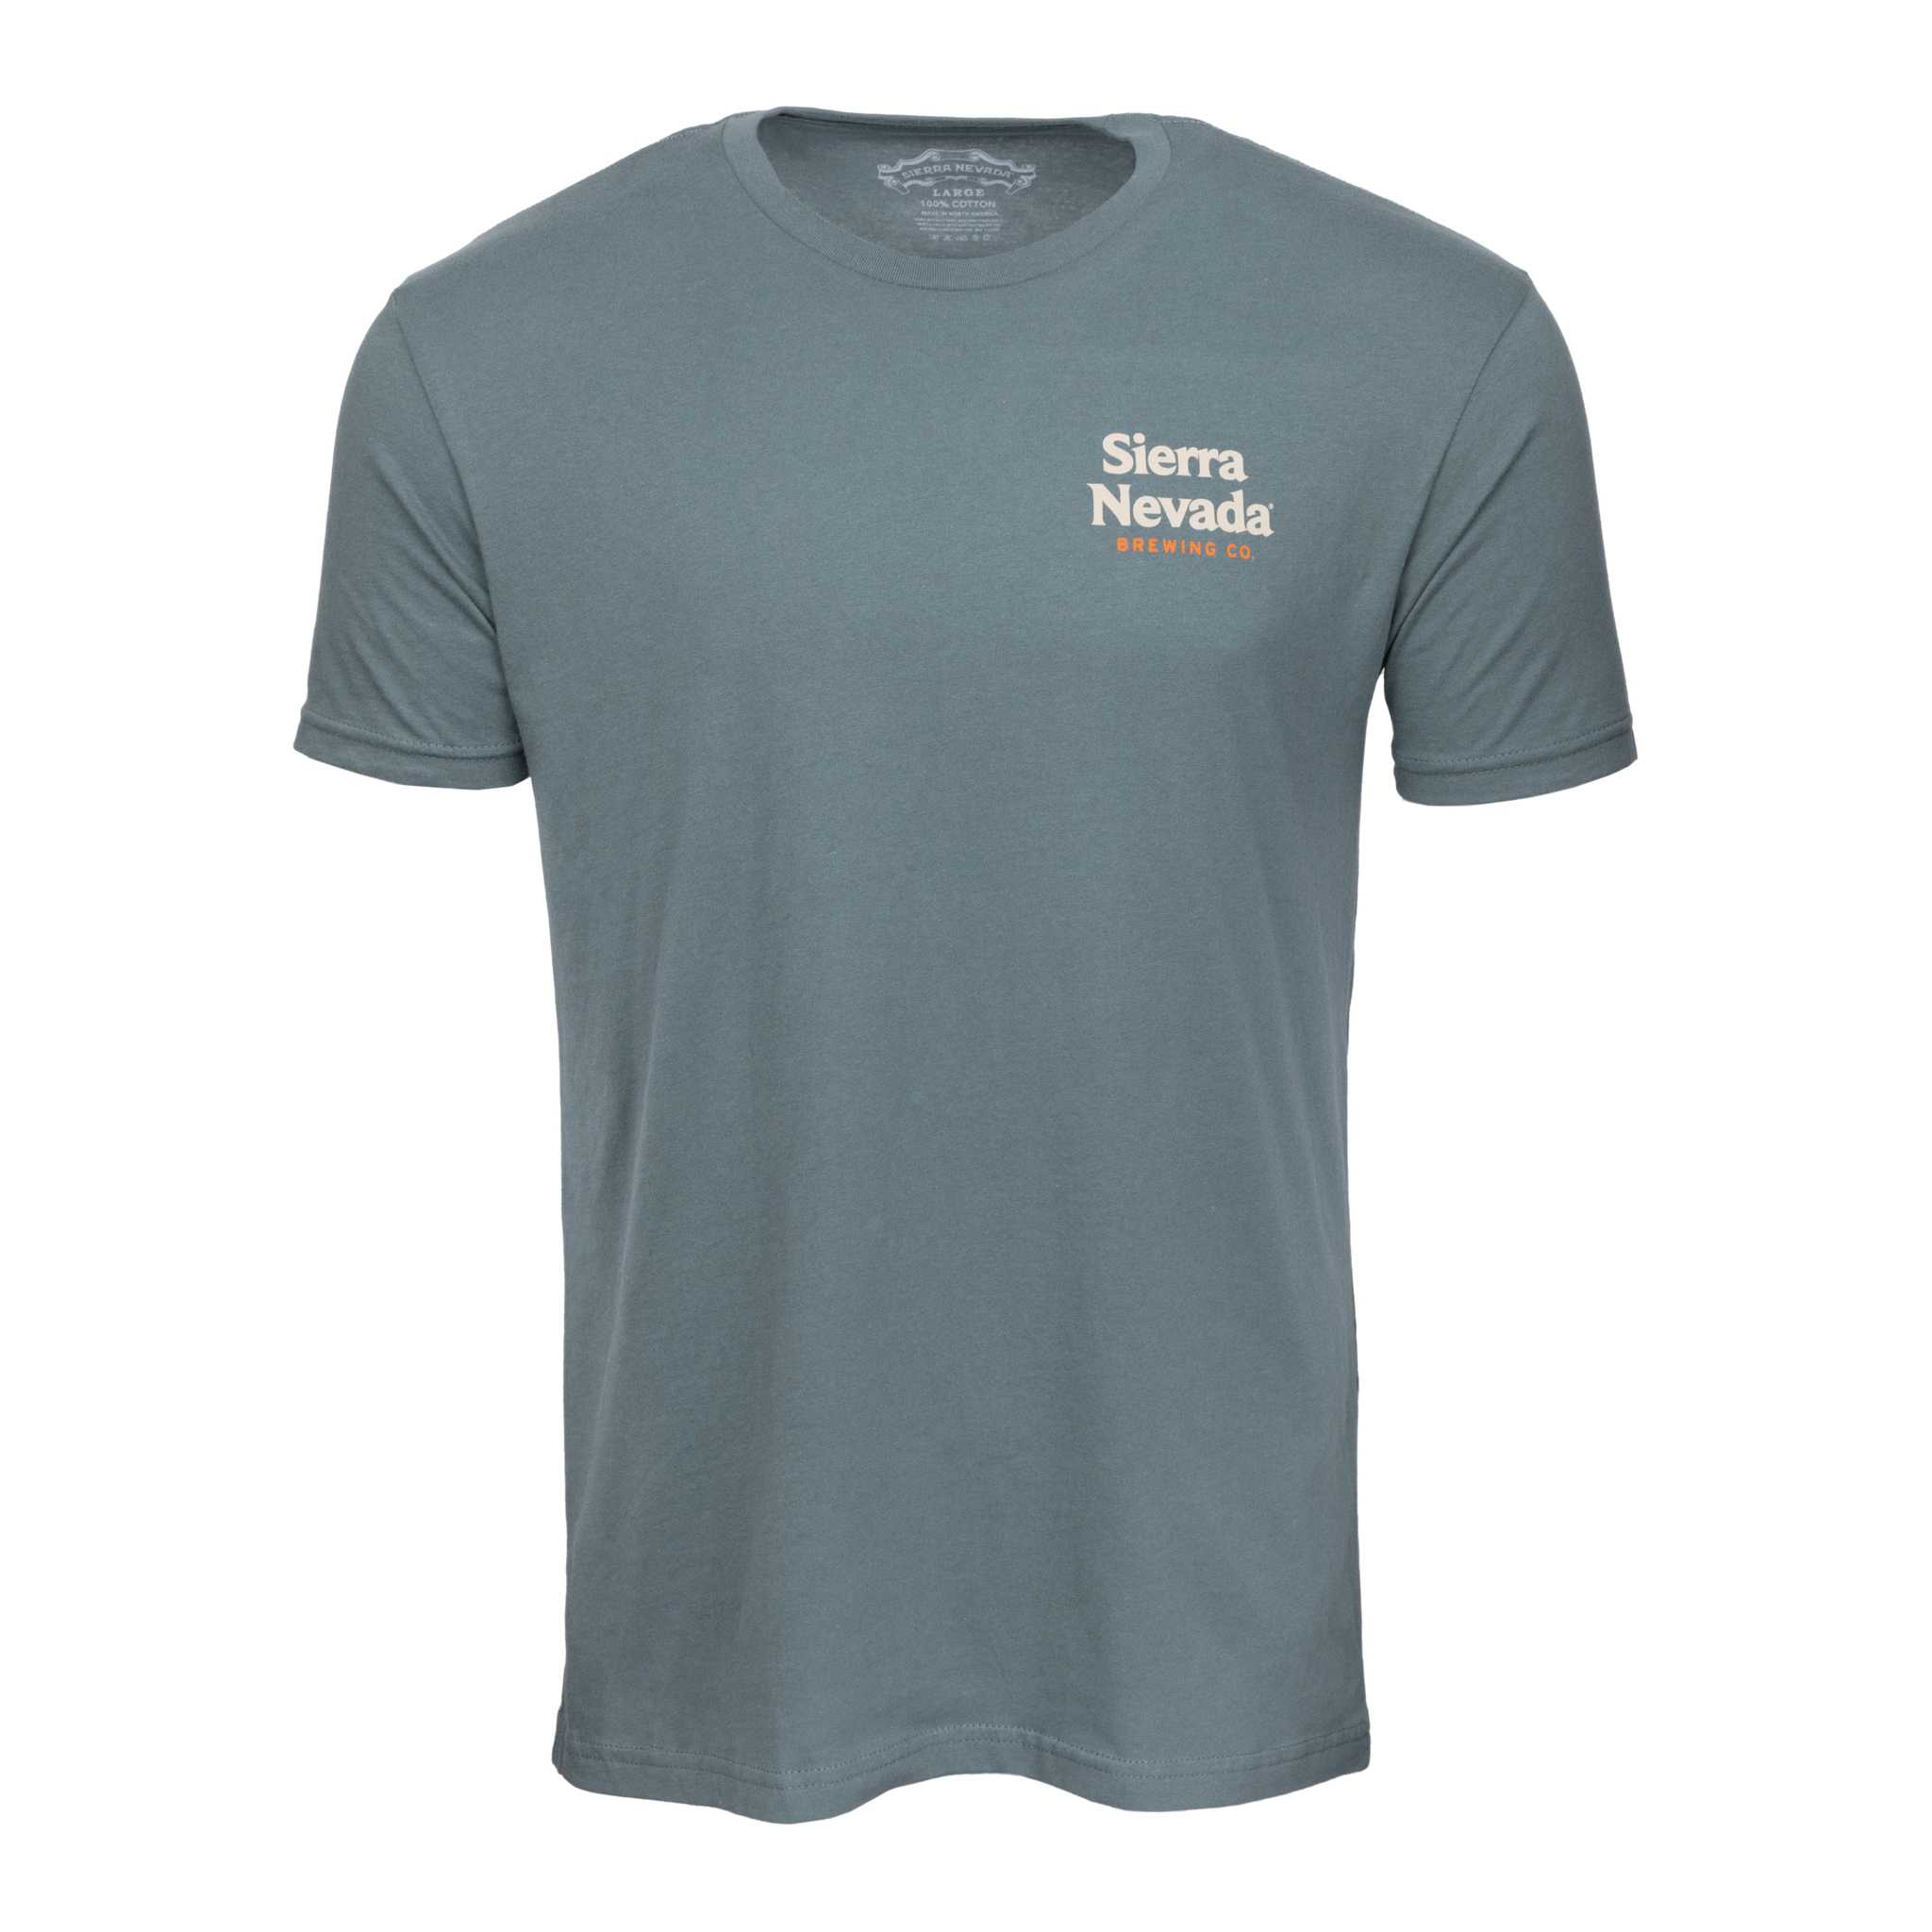 Sierra Nevada Brewing Co. Trail Royal Pine T-Shirt - front view